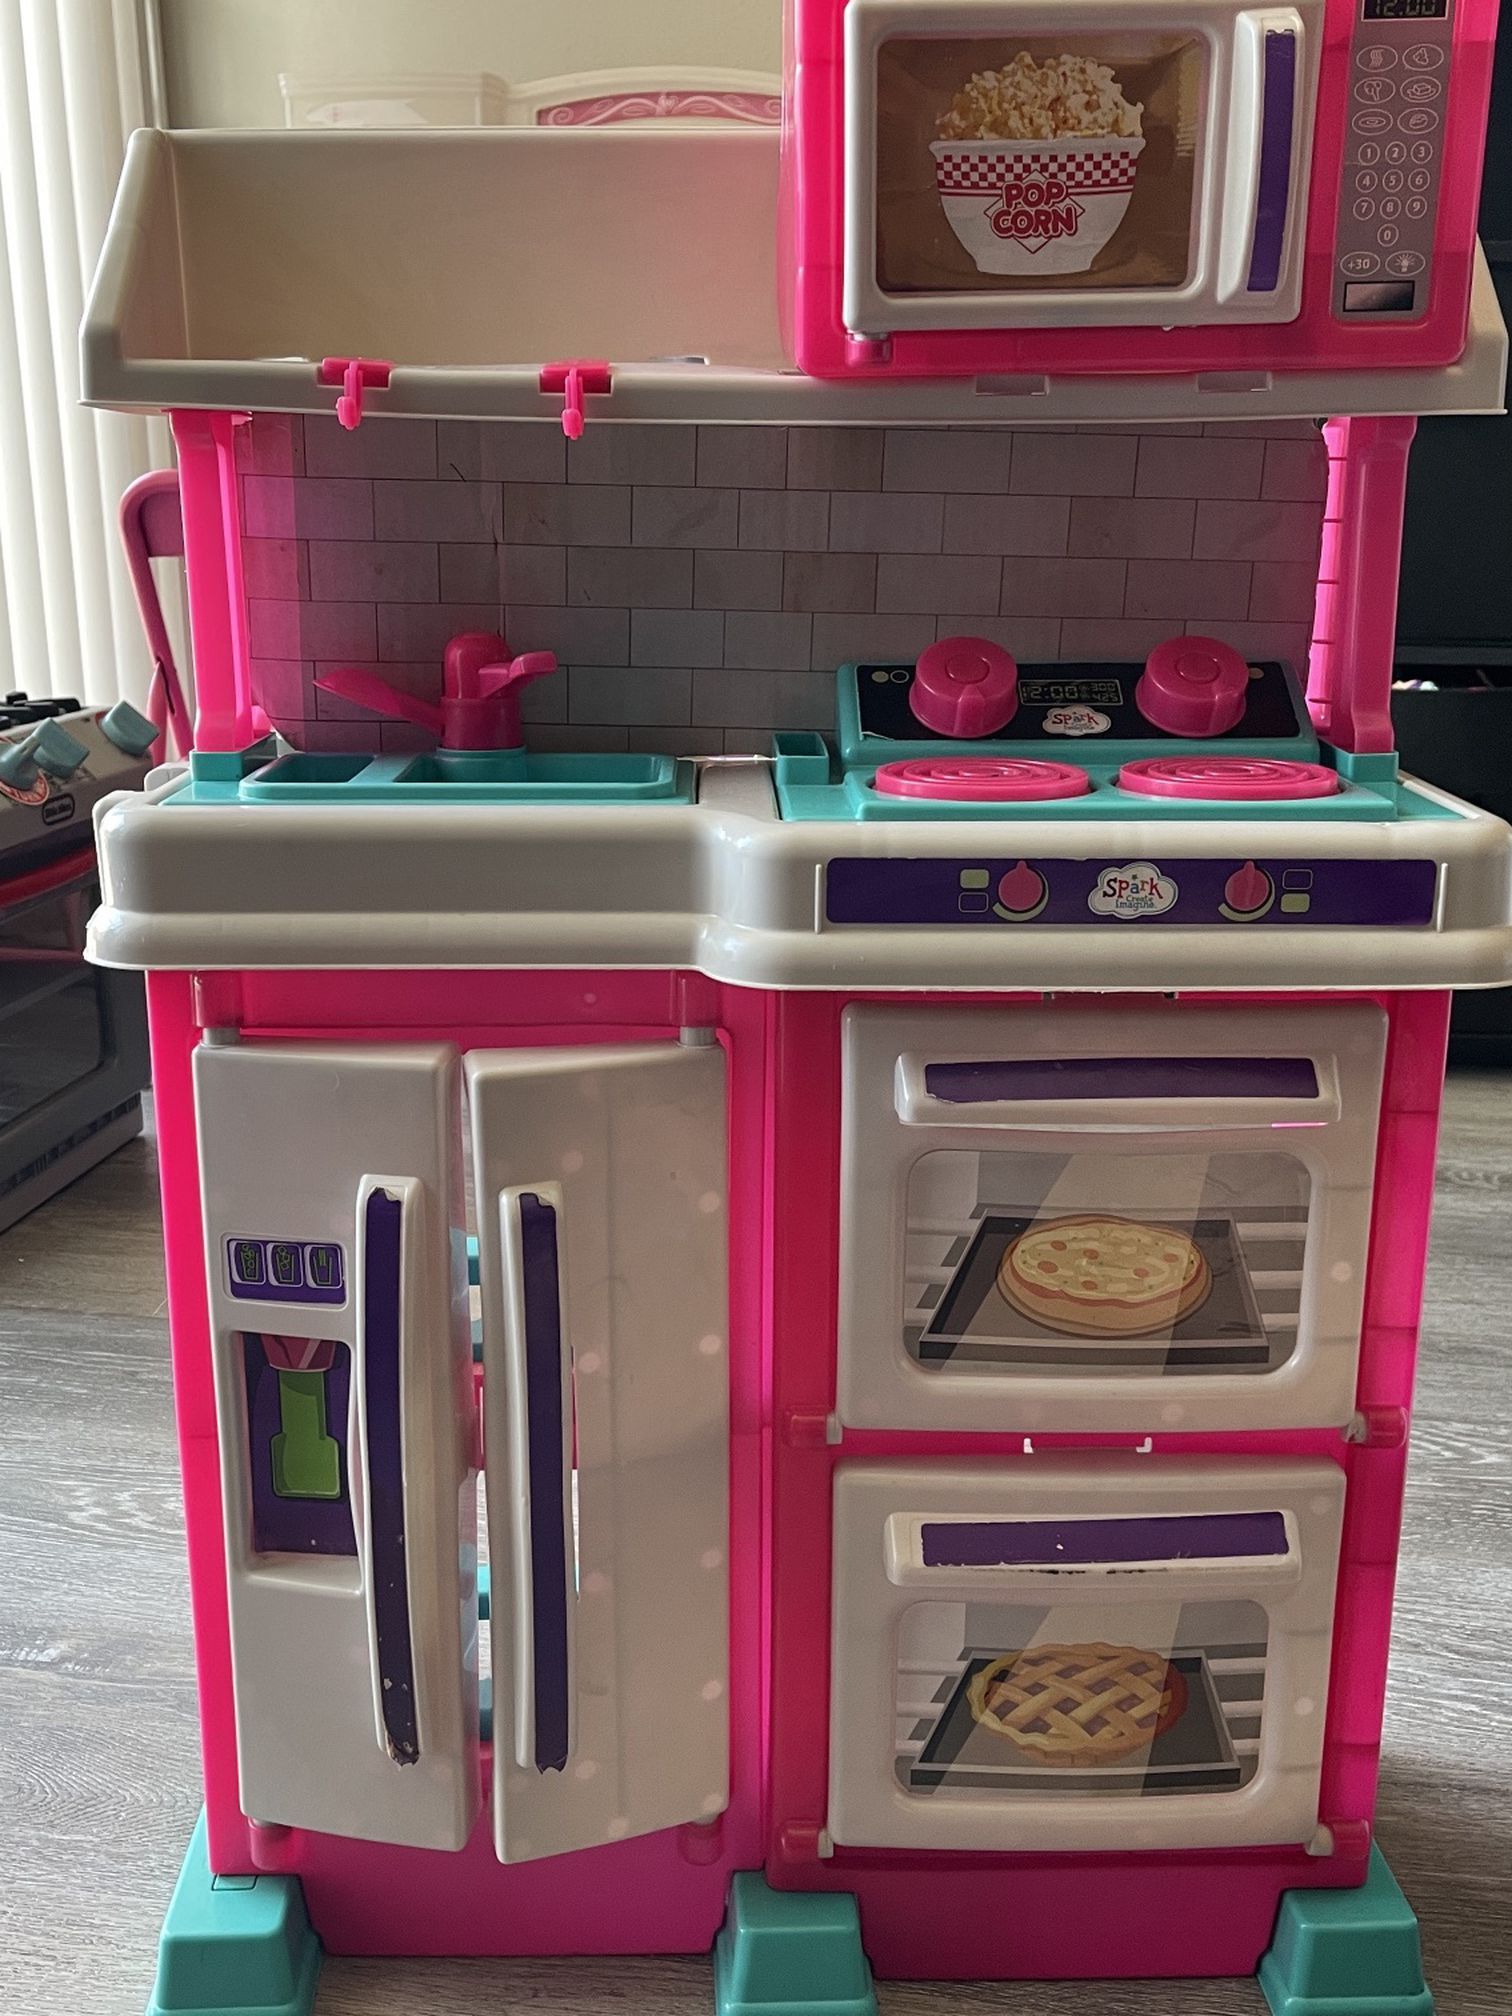 A toddler’s kitchen 2 1/2 feet tall good condition